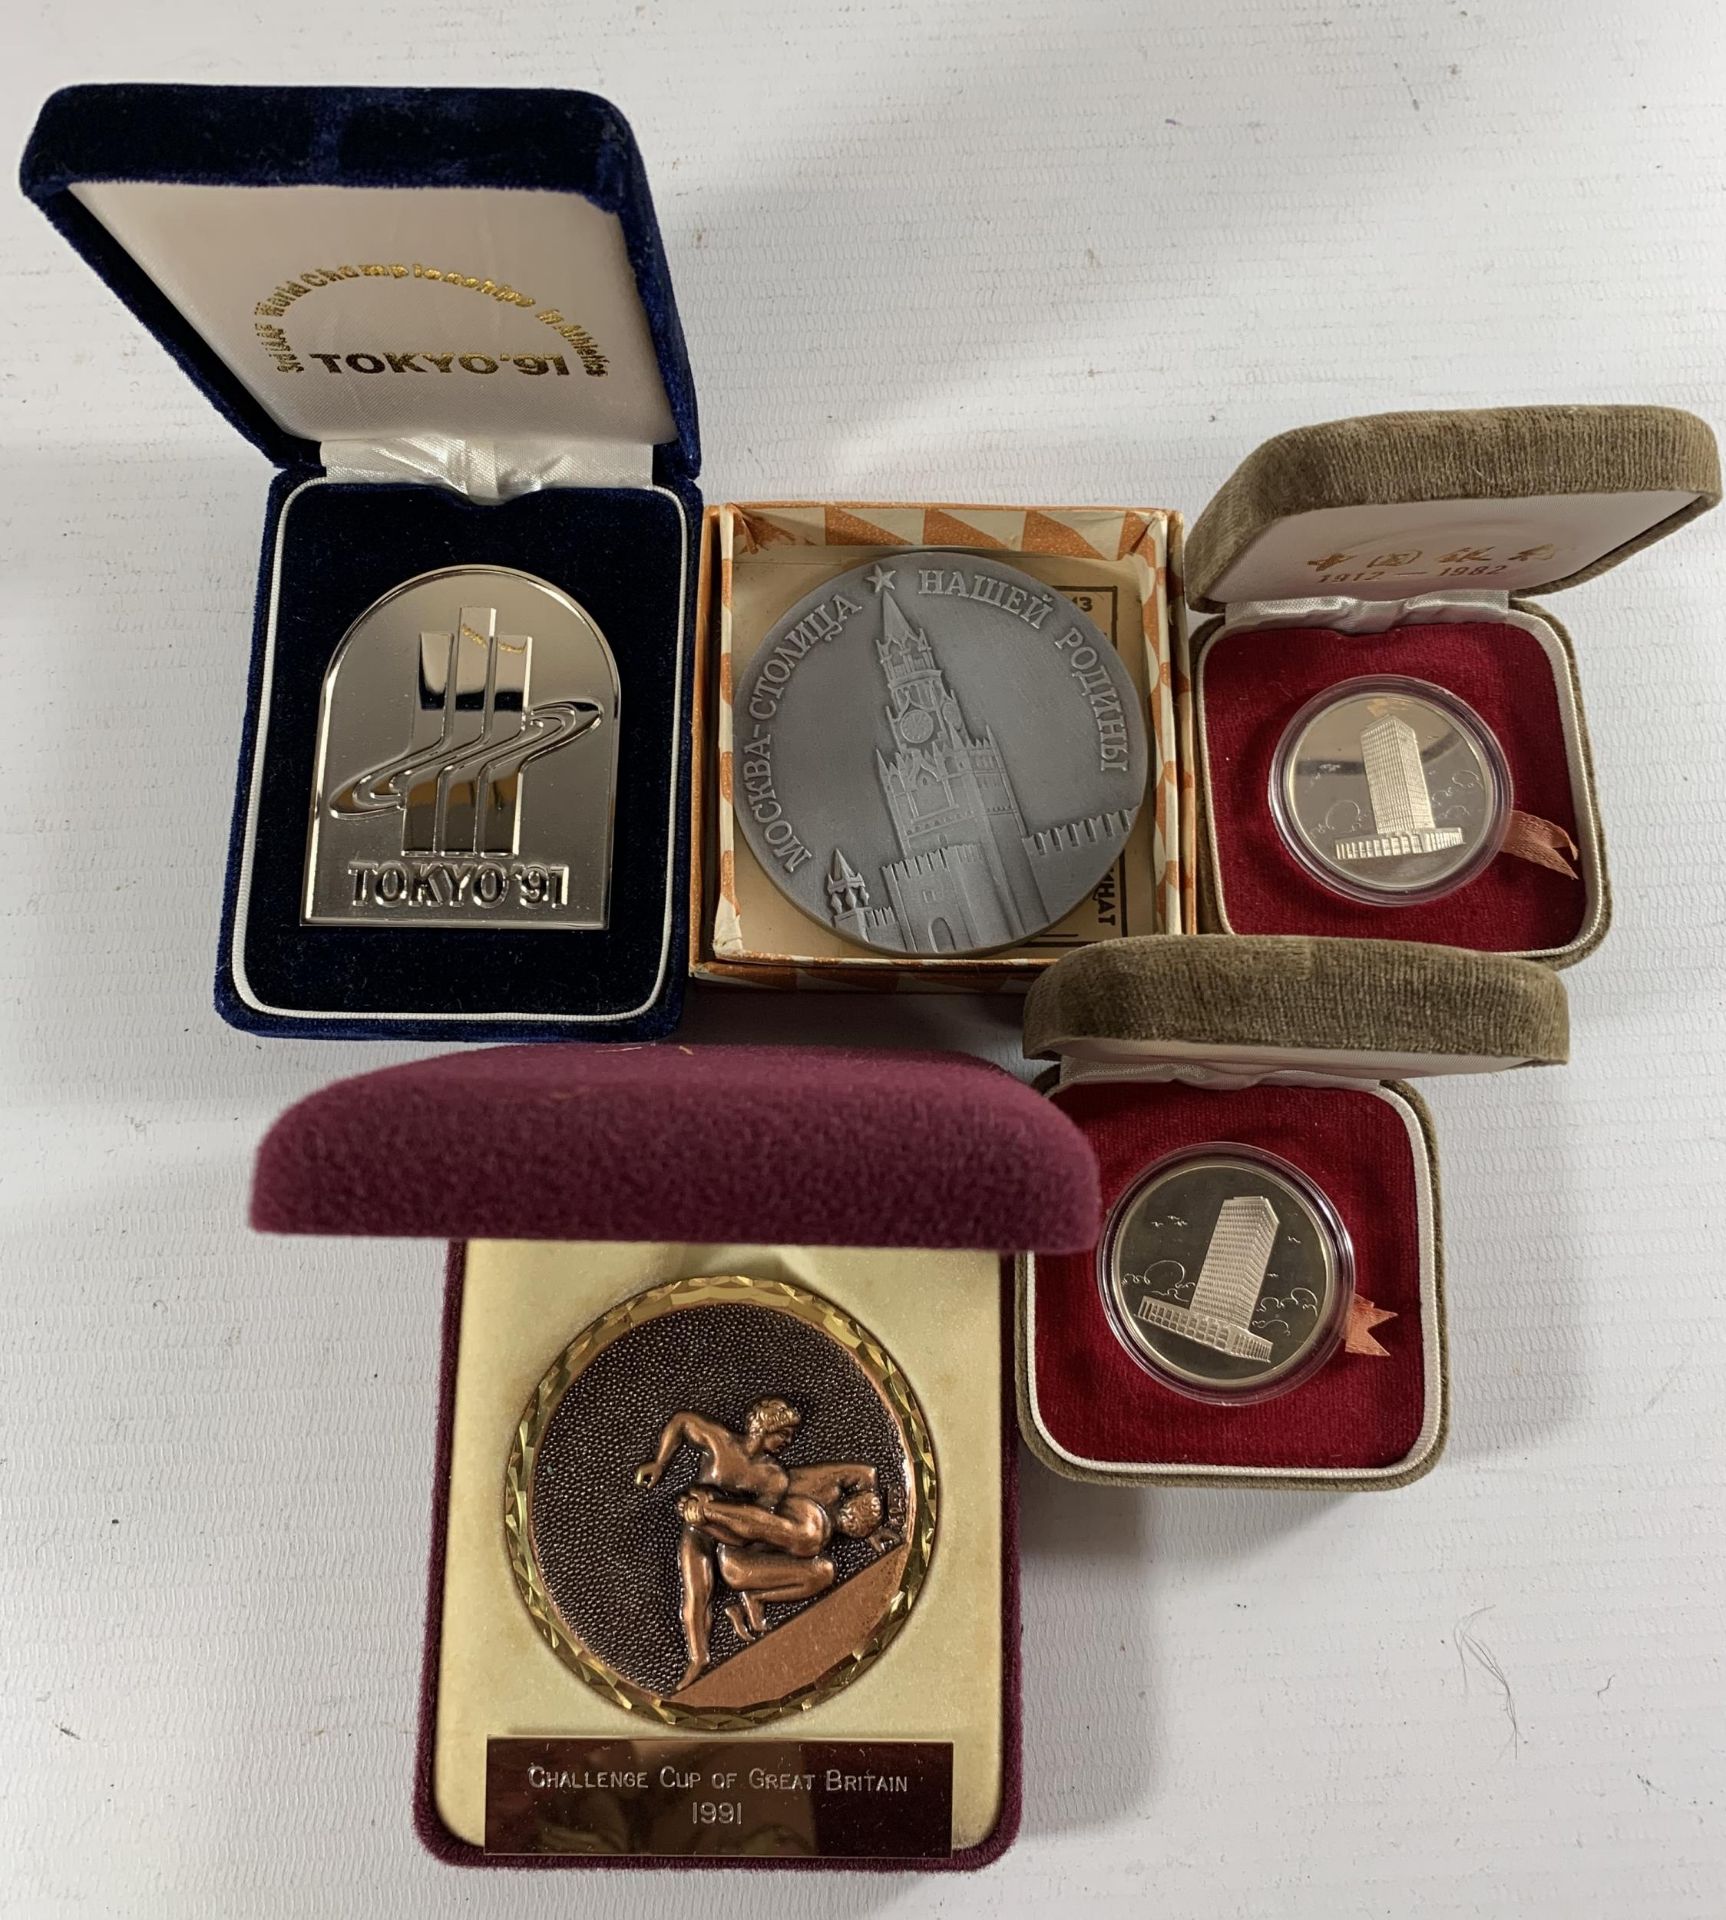 * A COLLECTION OF CASED MEDALS RELATING TO SPORT, BANKING AND RUSSIA